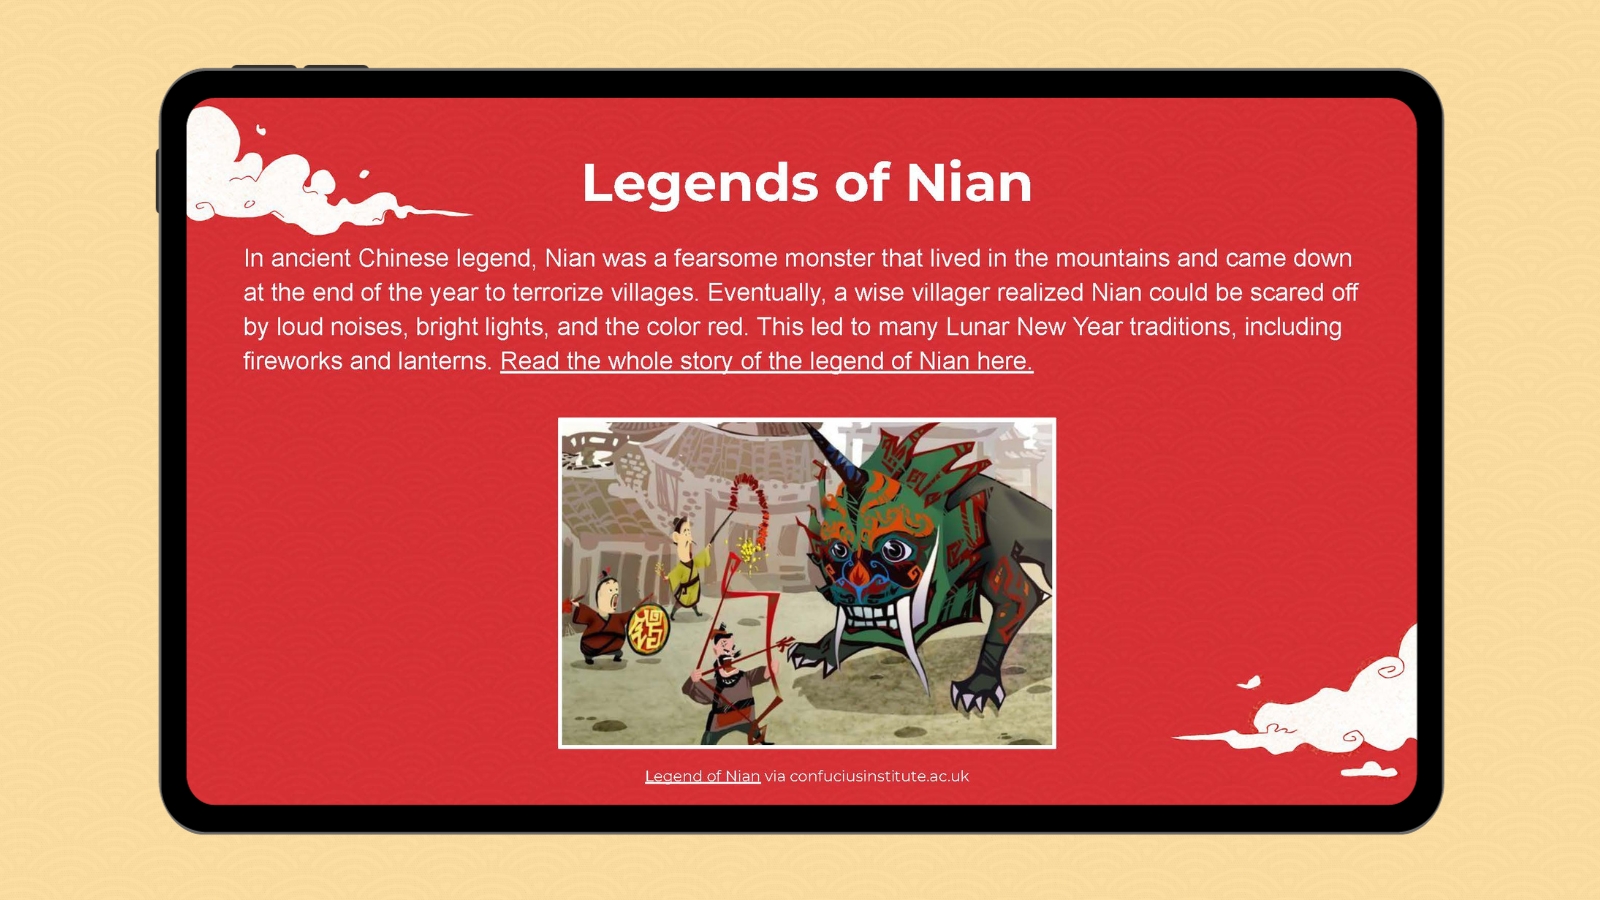 Google slide with image and information about the Lunar New Year Legends of Nian